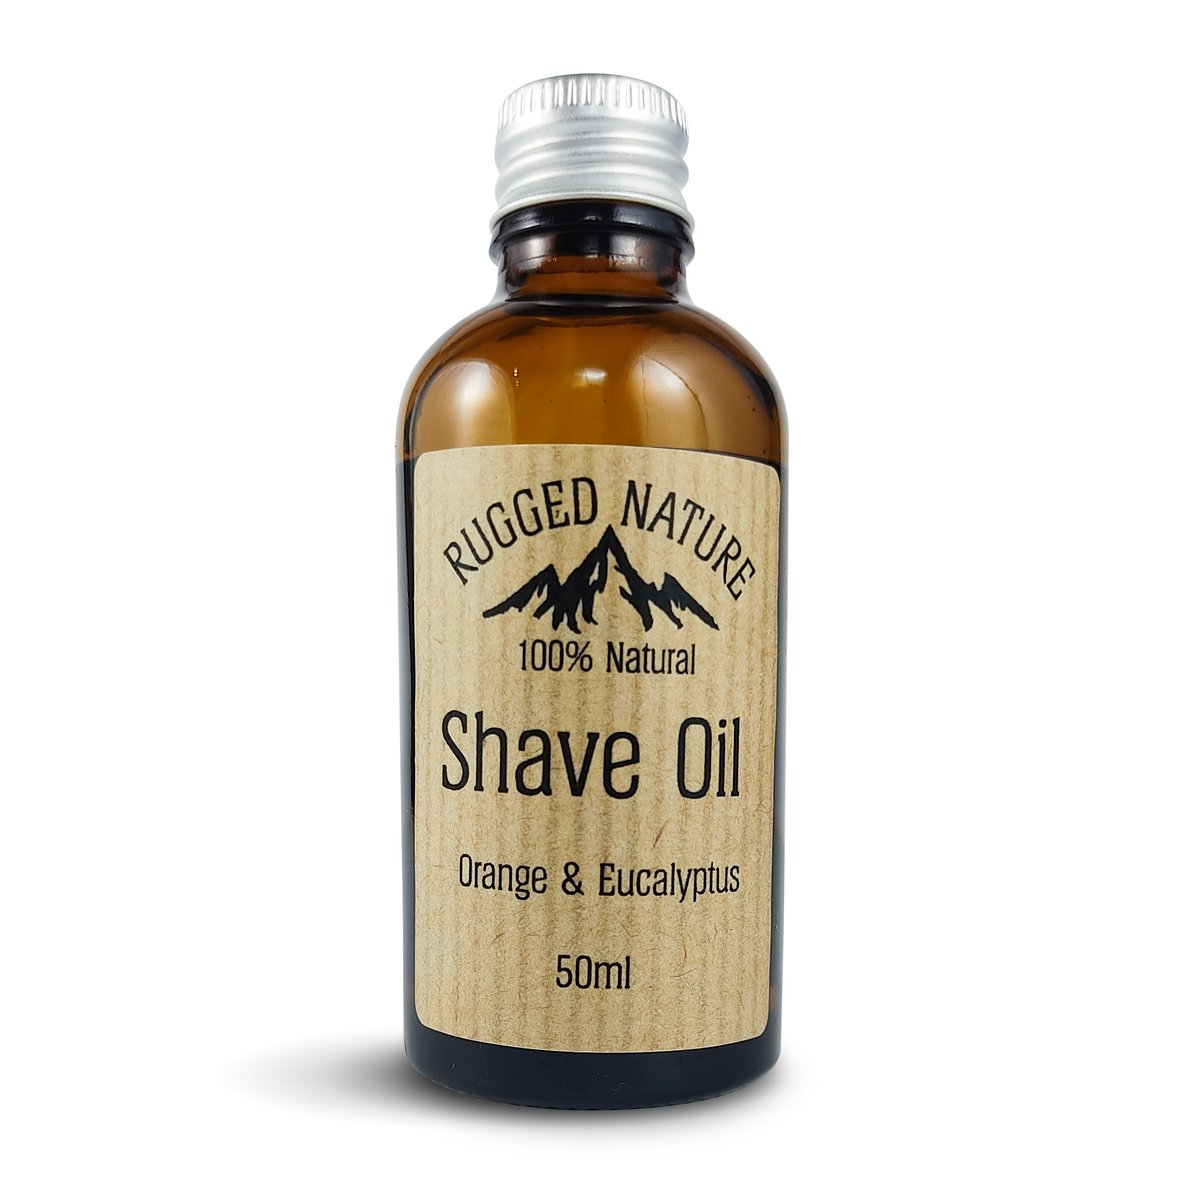 Rugged Nature - Shave Oil